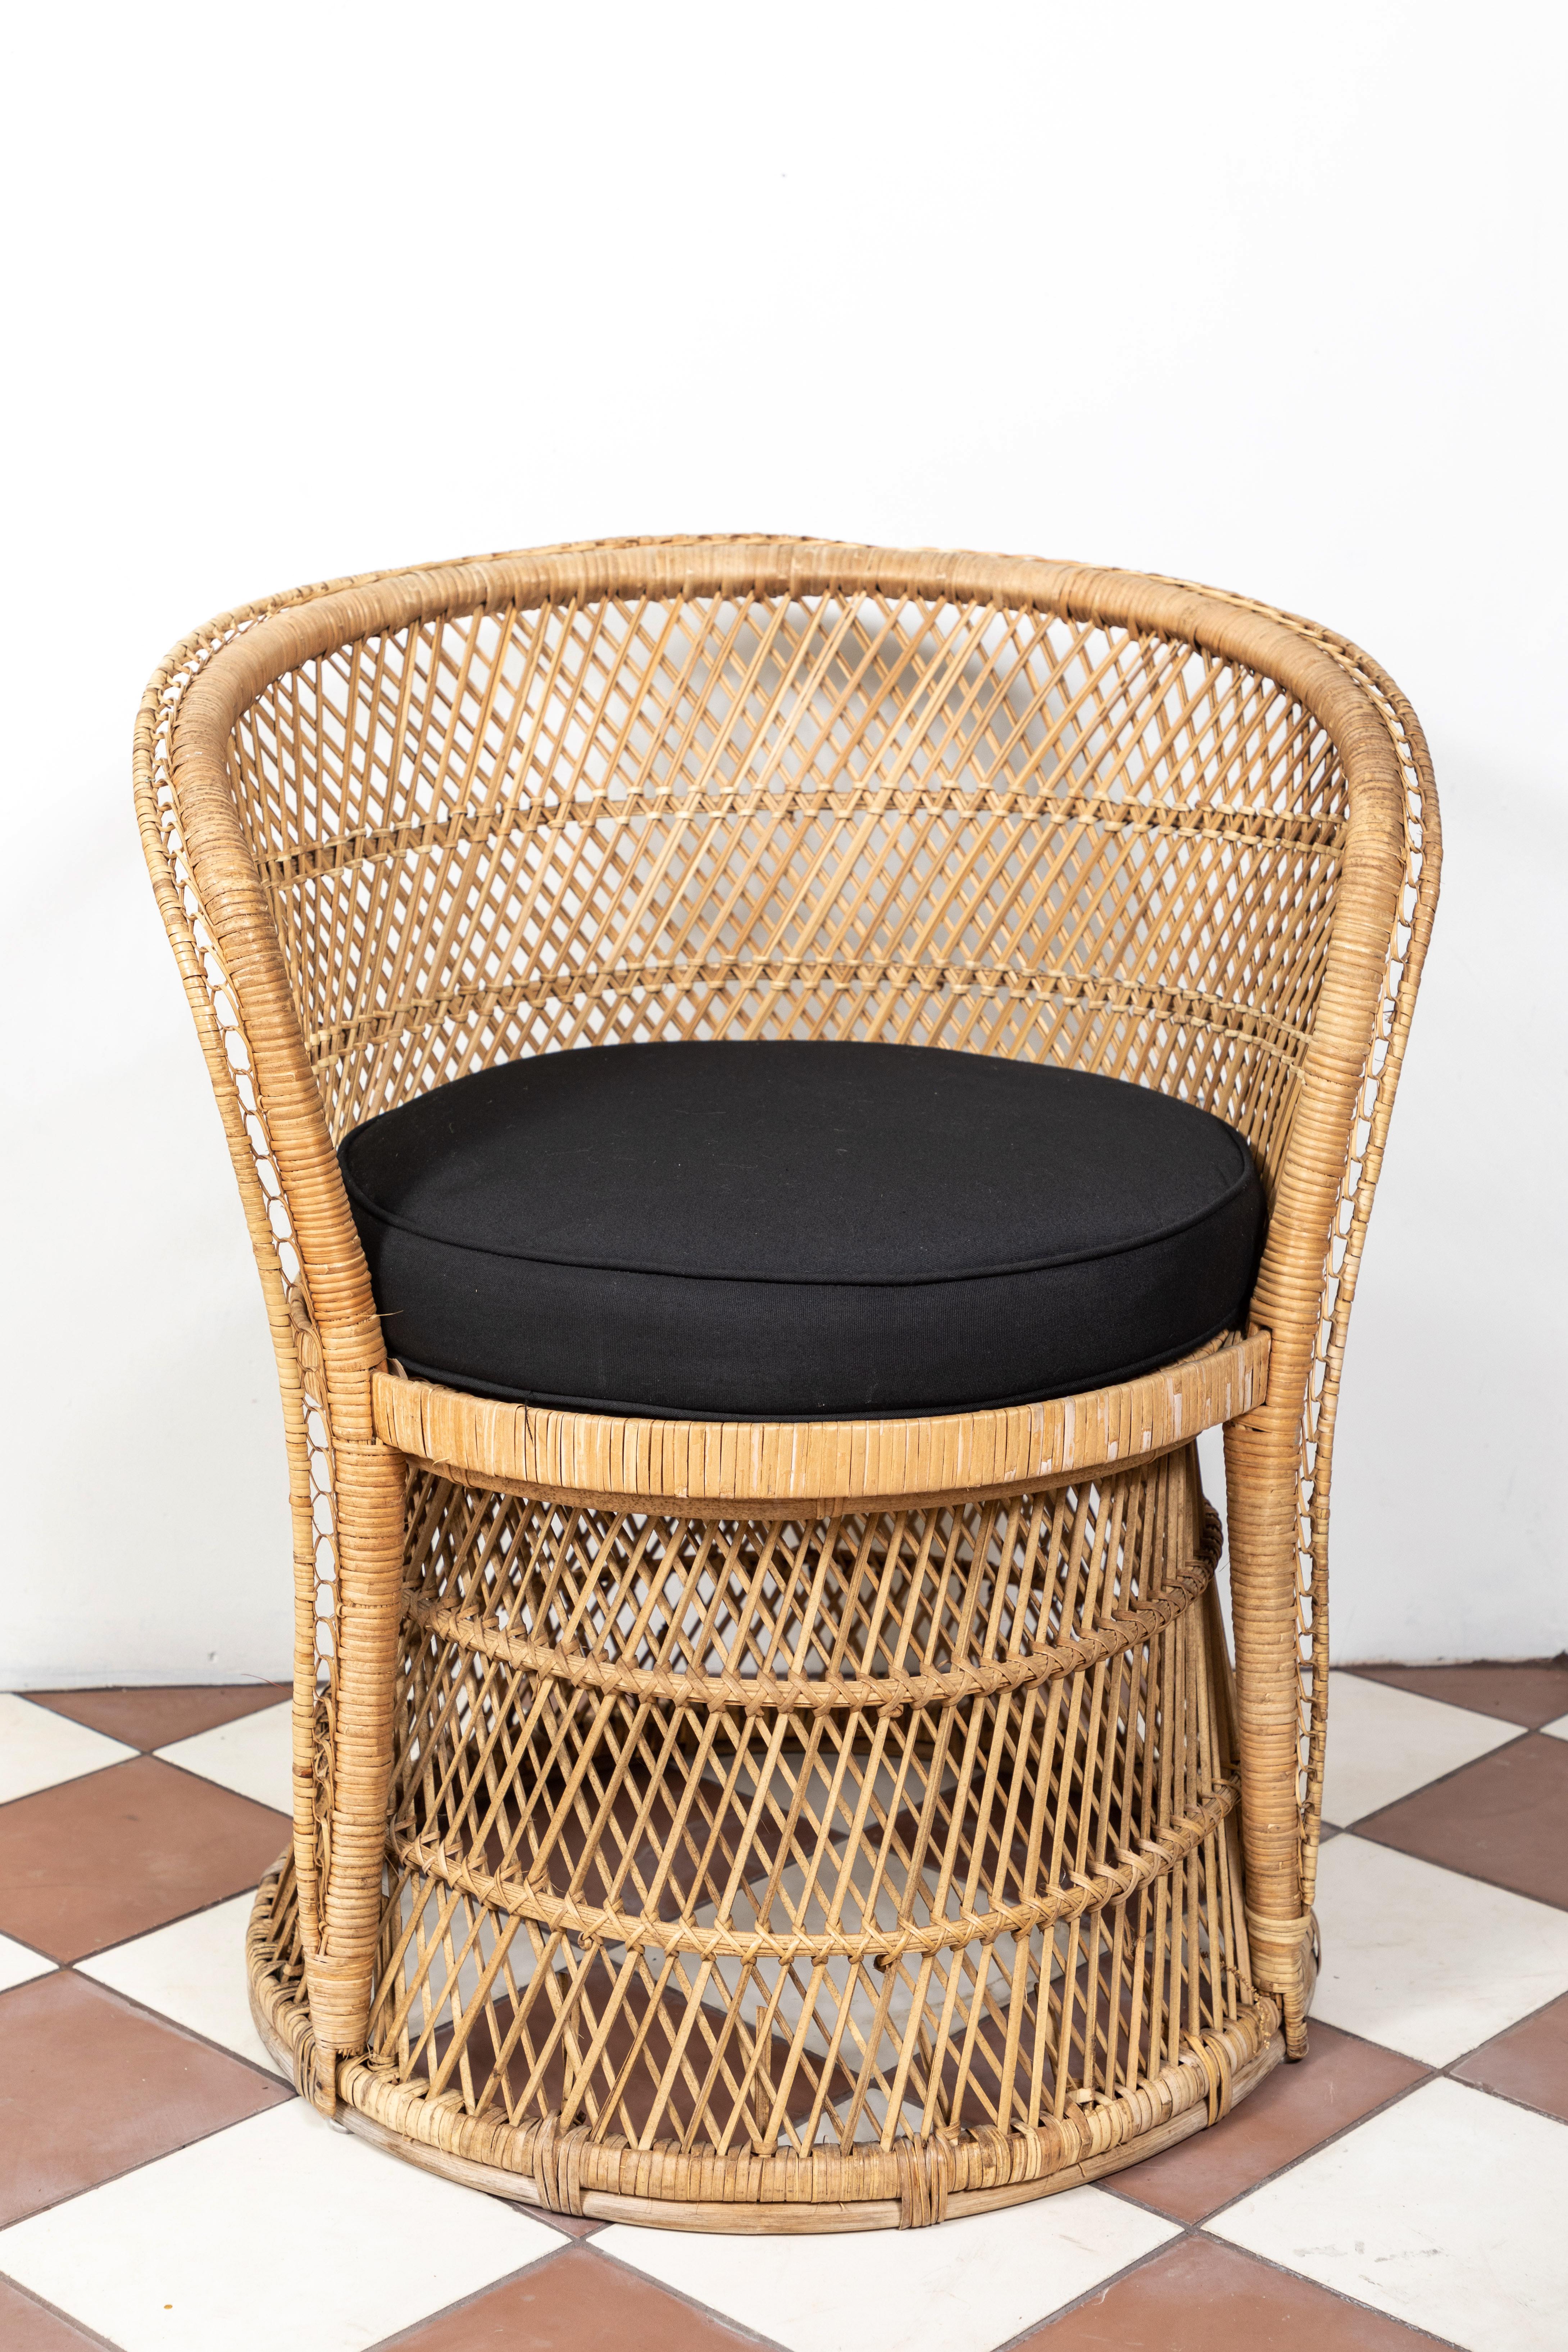 20th Century American Rattan Dining Table with 4 Chairs 3